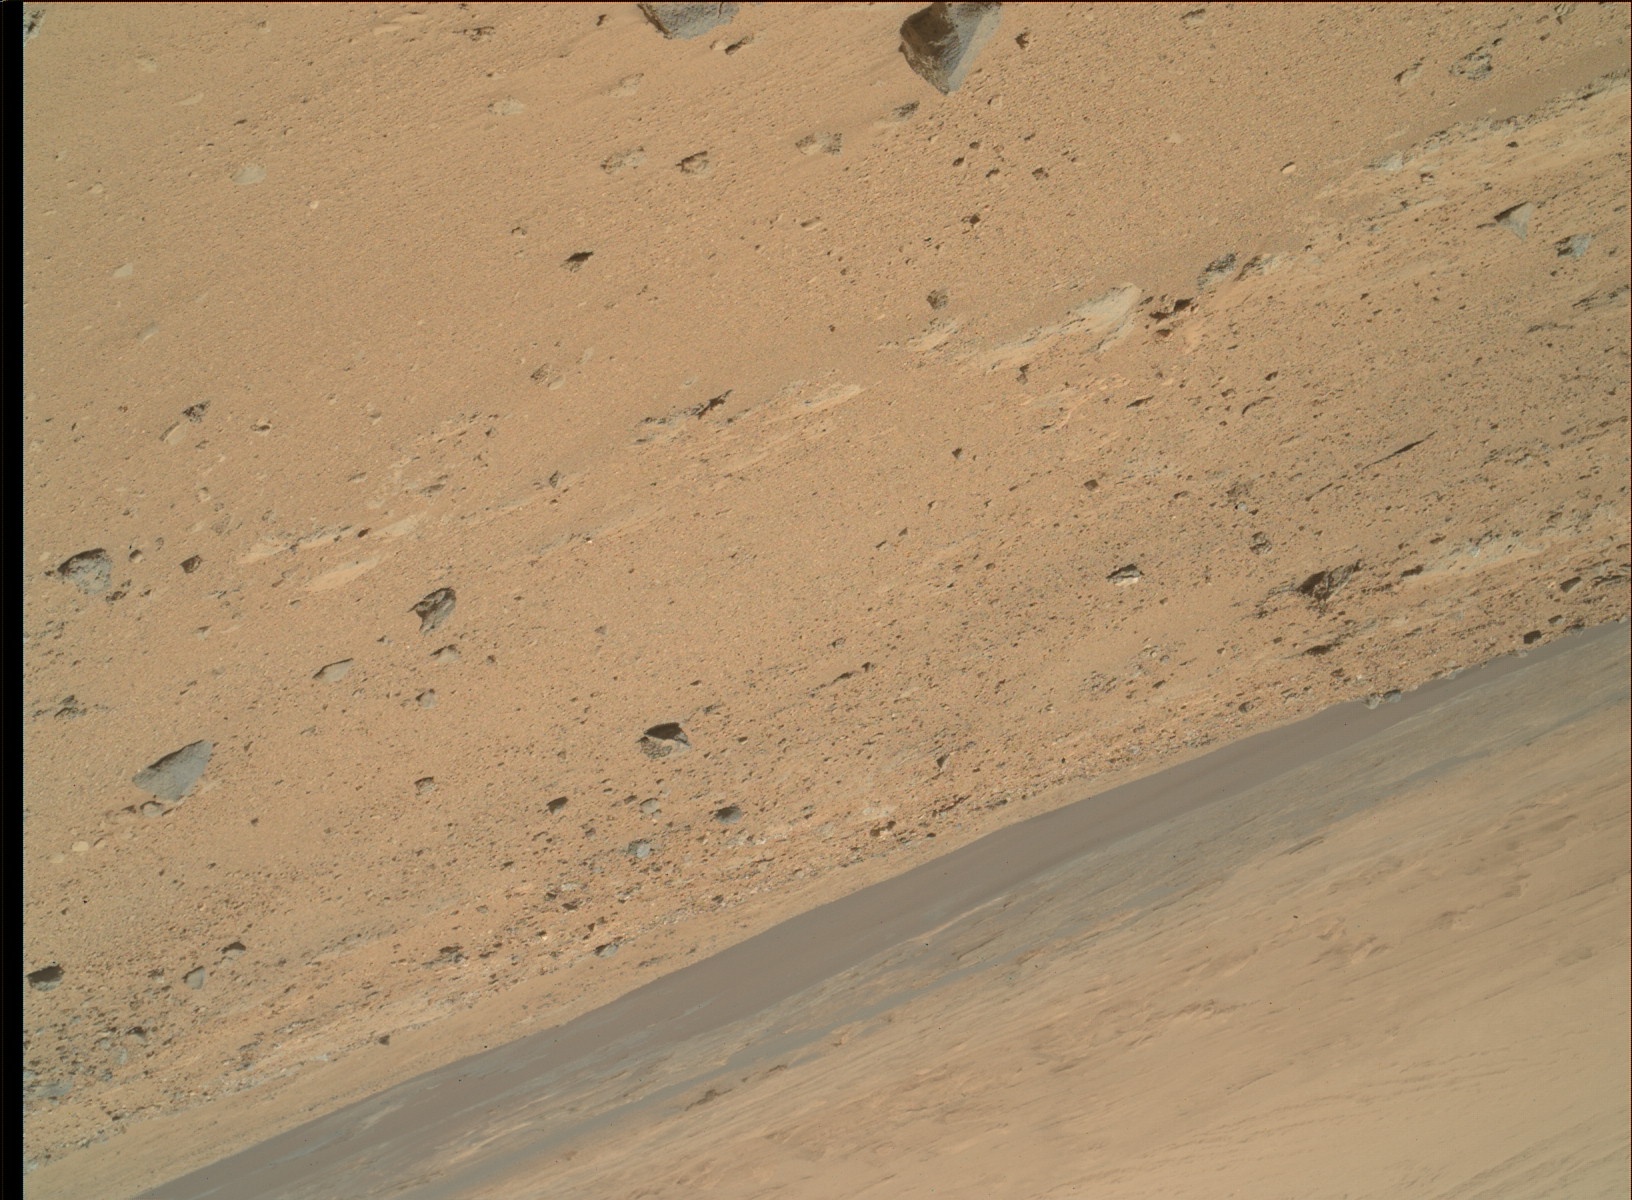 Nasa's Mars rover Curiosity acquired this image using its Mars Hand Lens Imager (MAHLI) on Sol 402